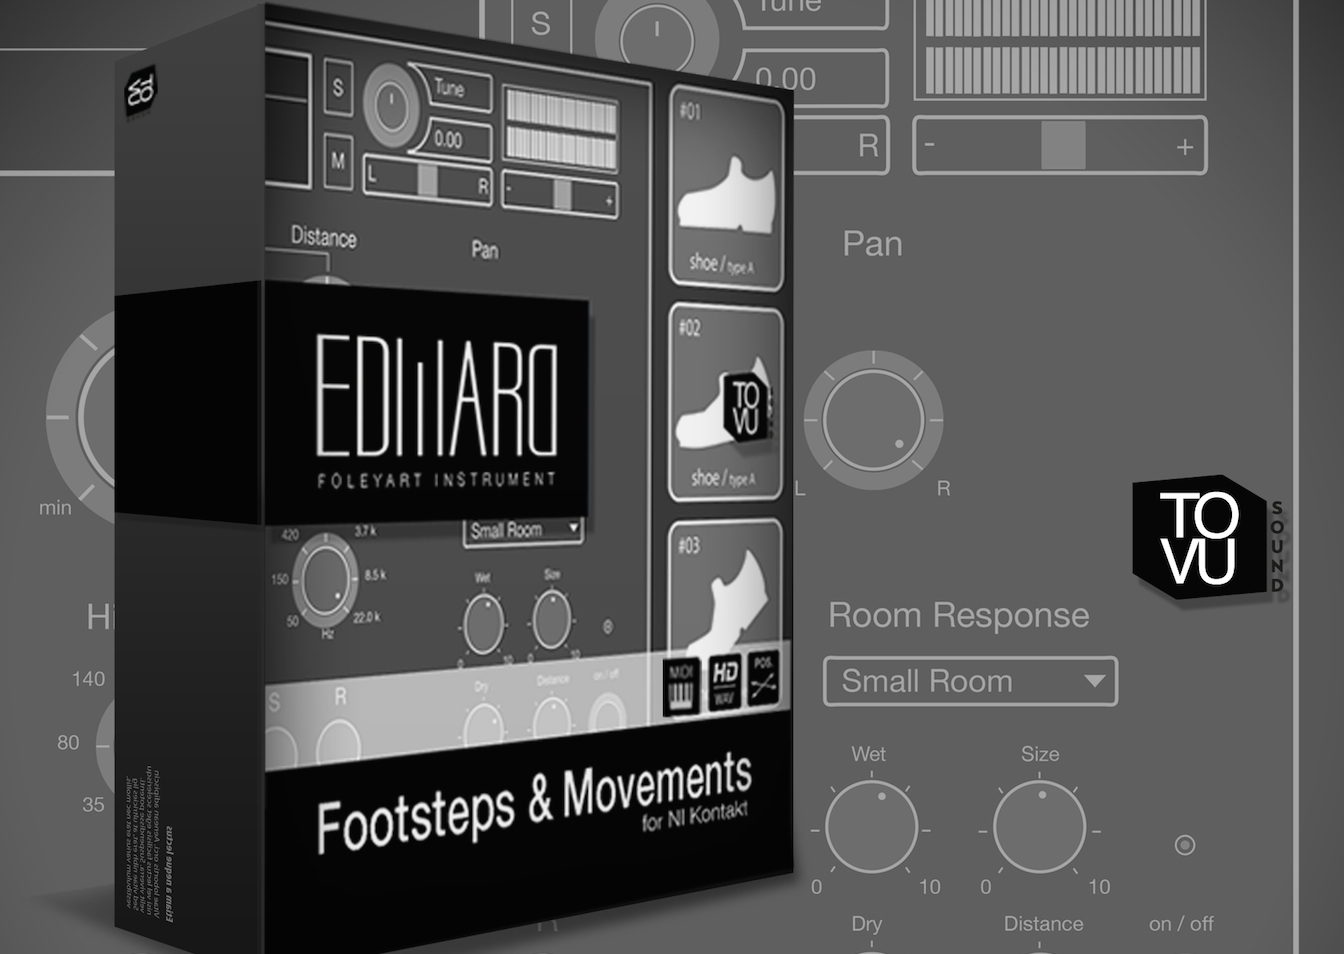 New Software Review: Edward Ultimate Foleyart Instrument from Tovusound